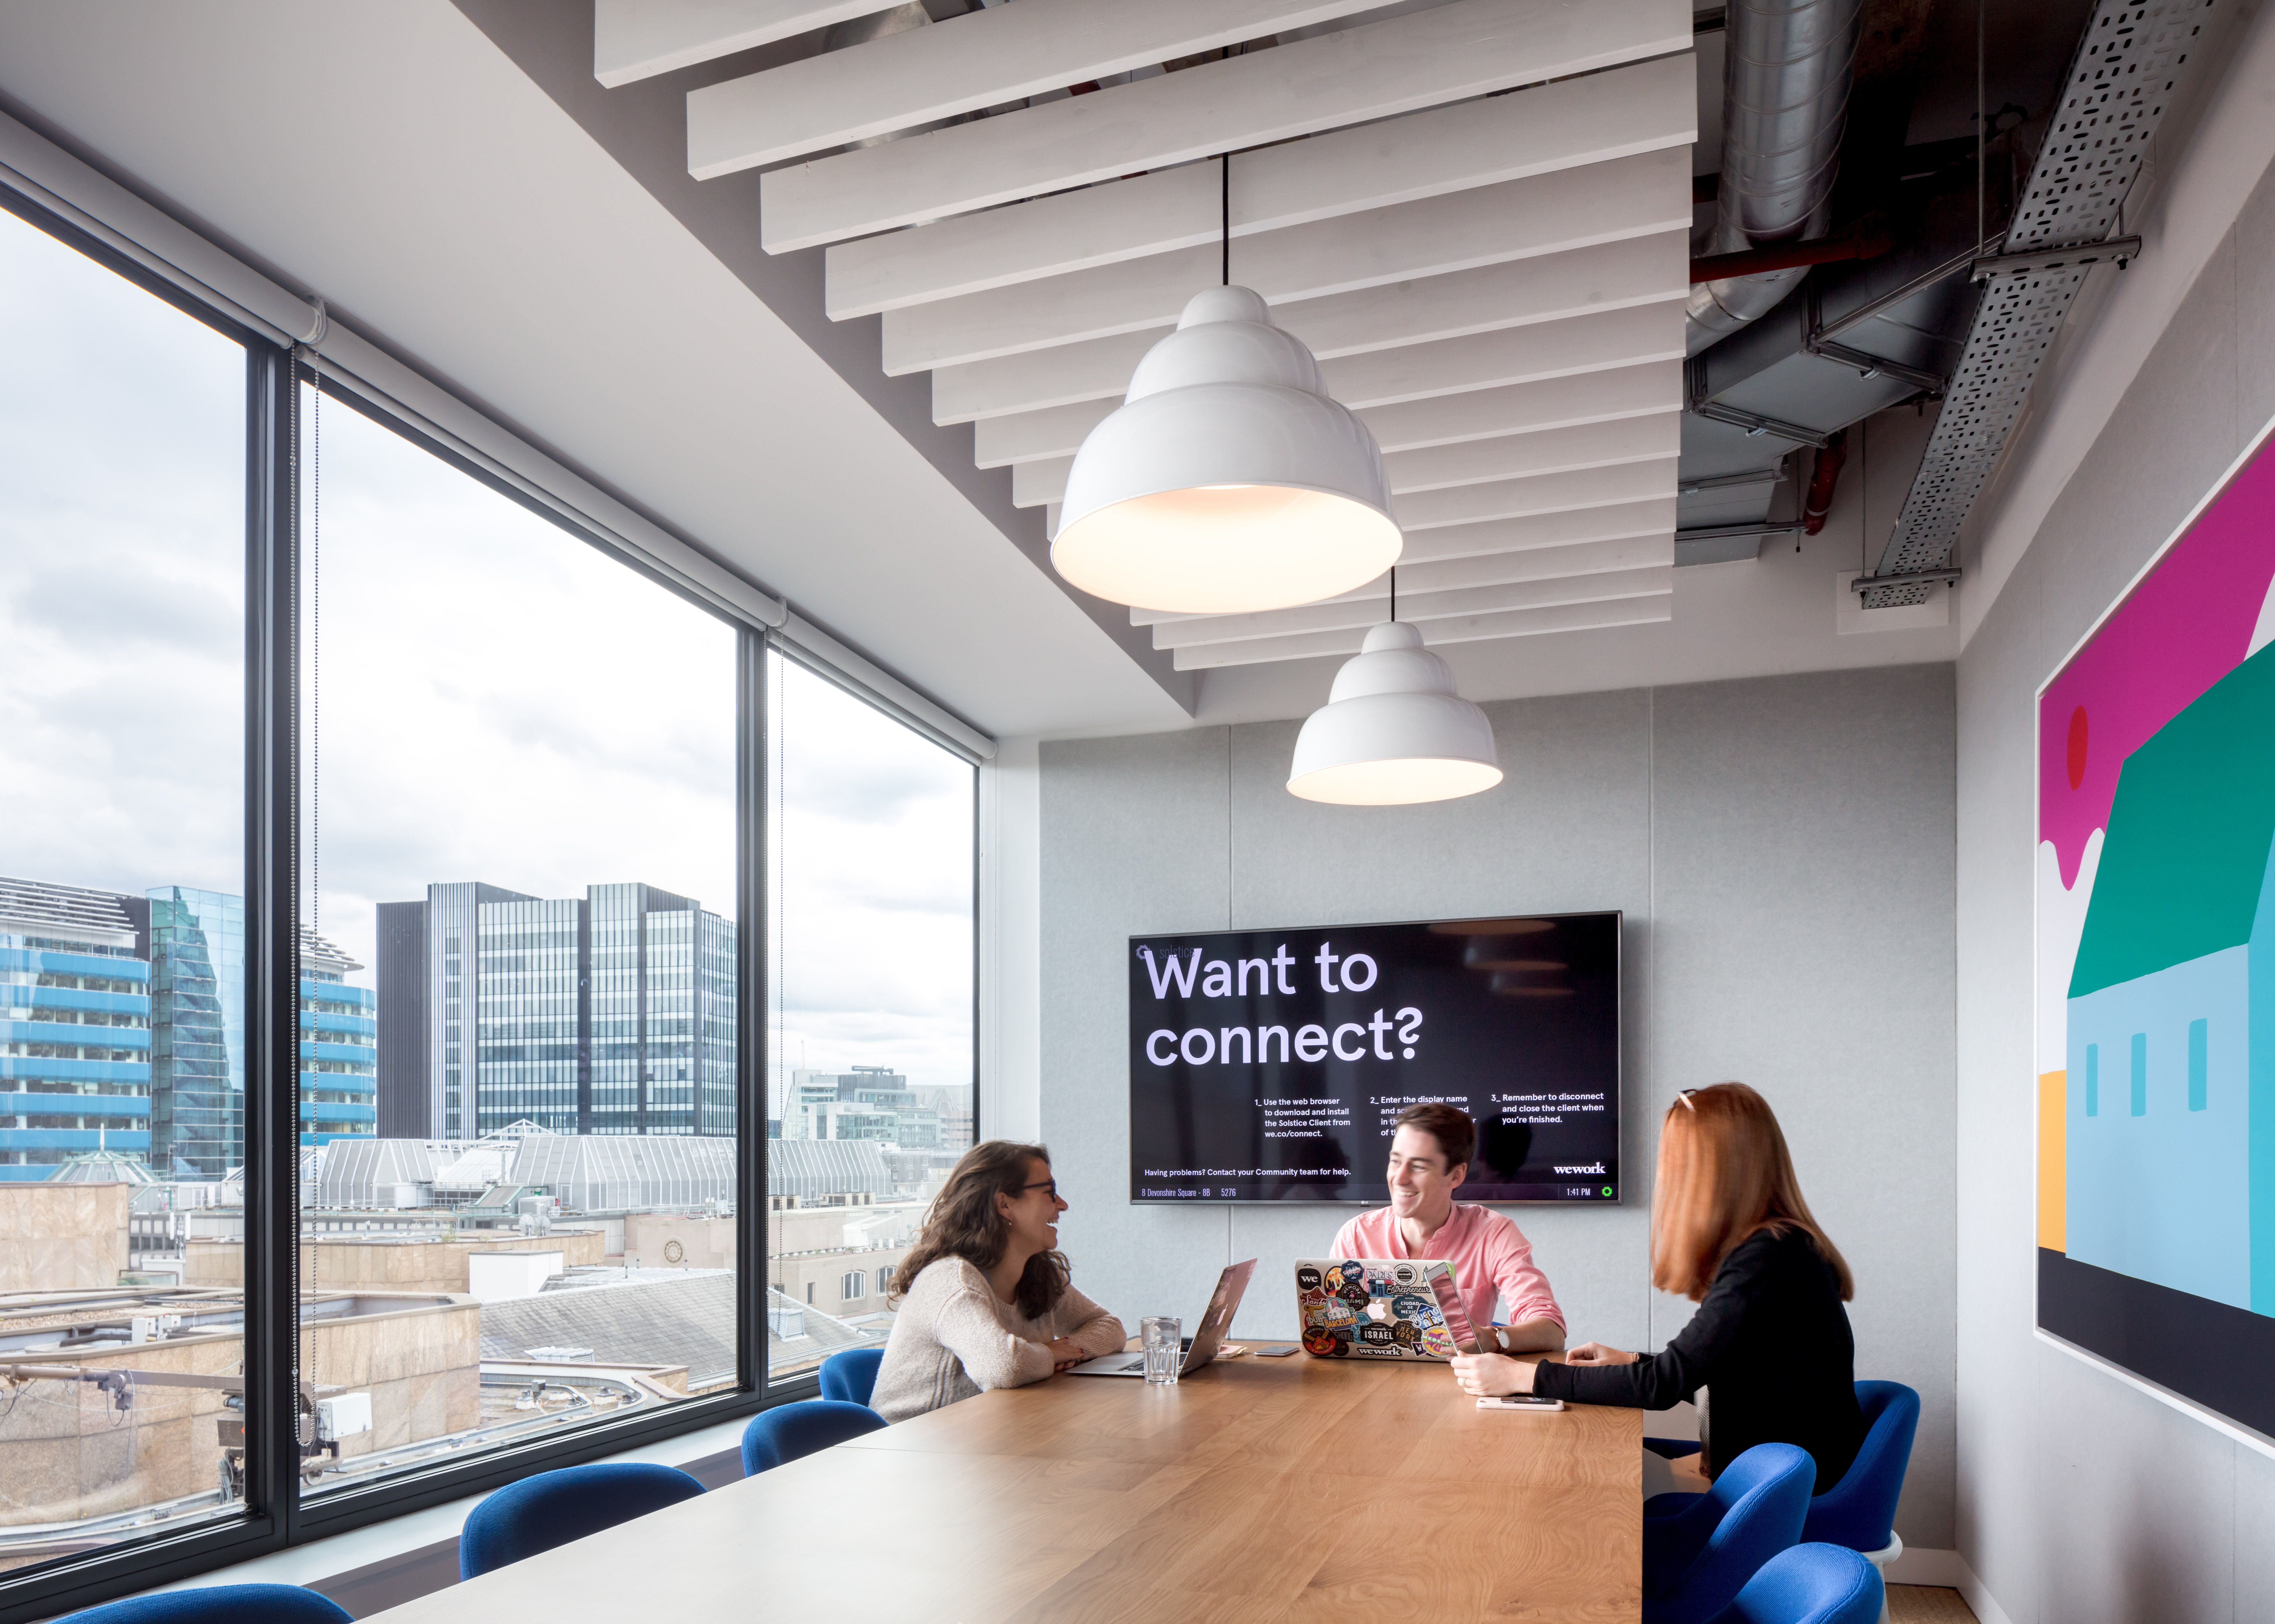 WeWork 8 Devonshire Square - Coworking & Office Space London 020 3695 7895